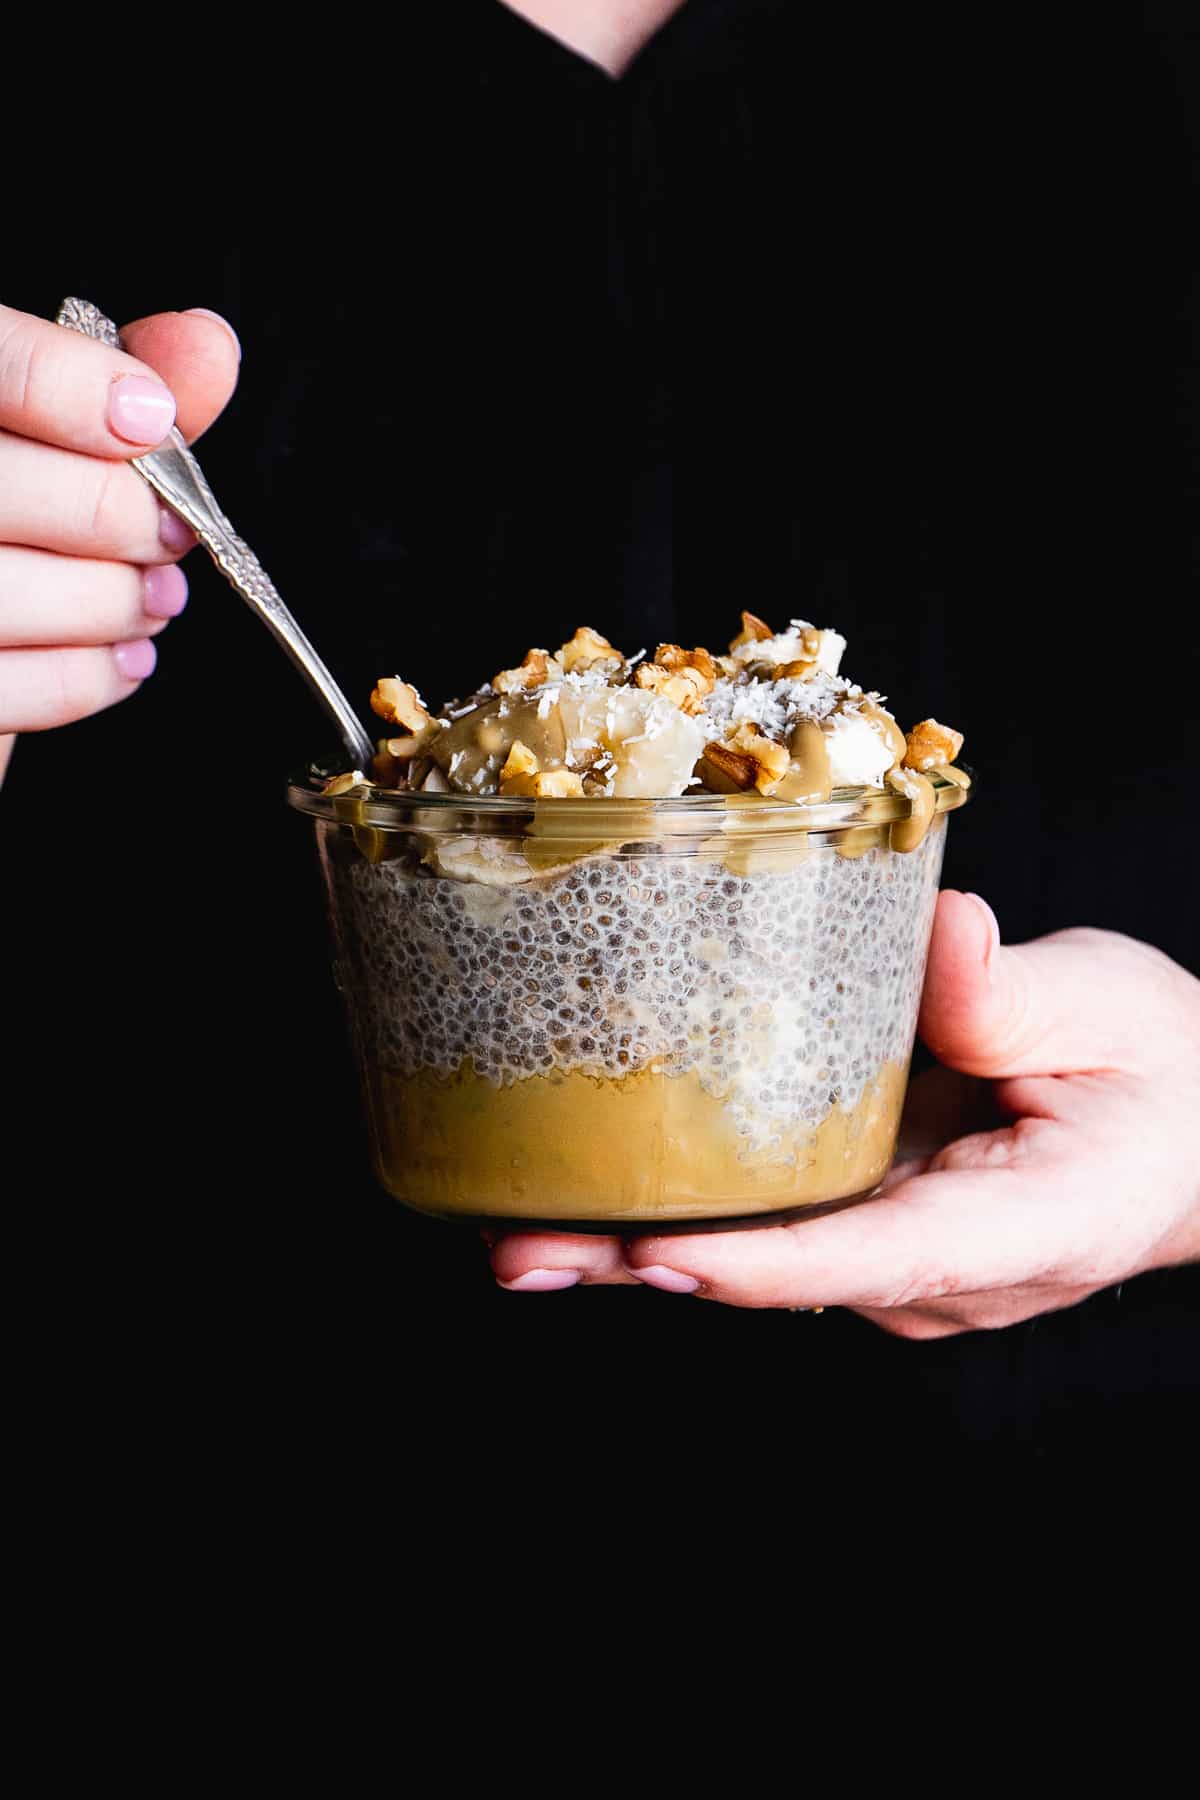 Person holding chia pudding in a jar with toppings with a black shirt.